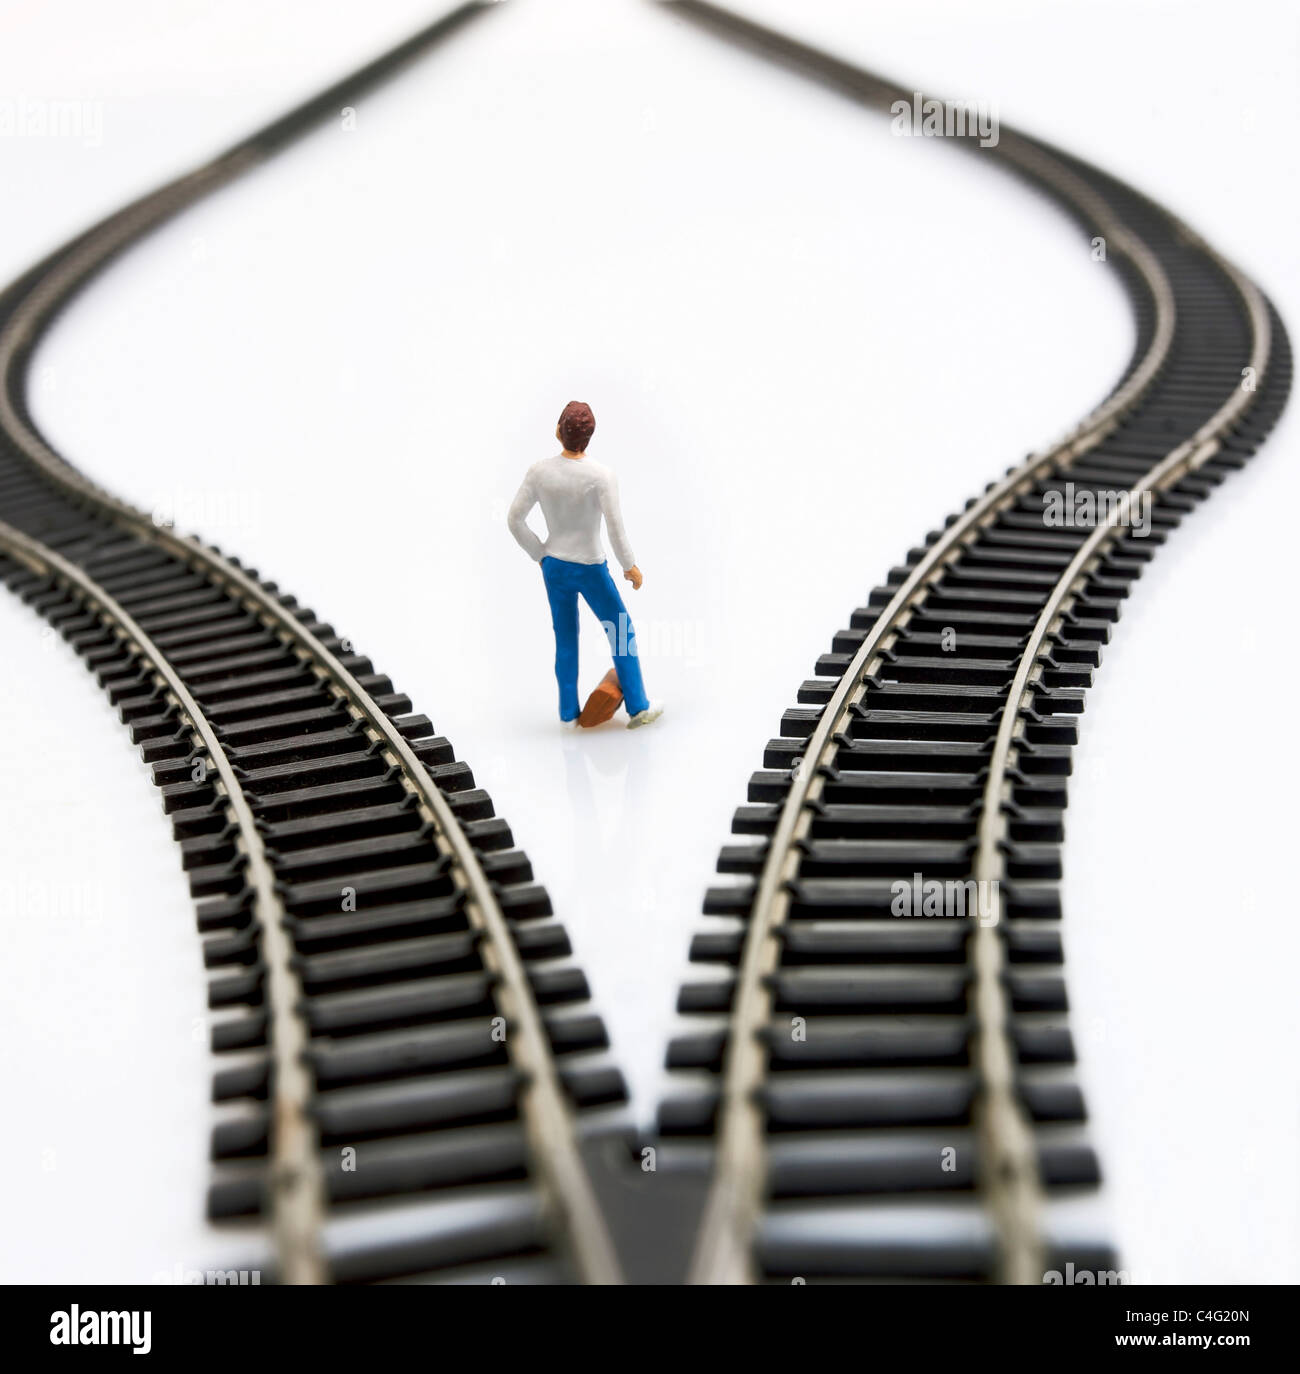 Figurine between two tracks leading into different directions, symbolic image for making decisions. Stock Photo